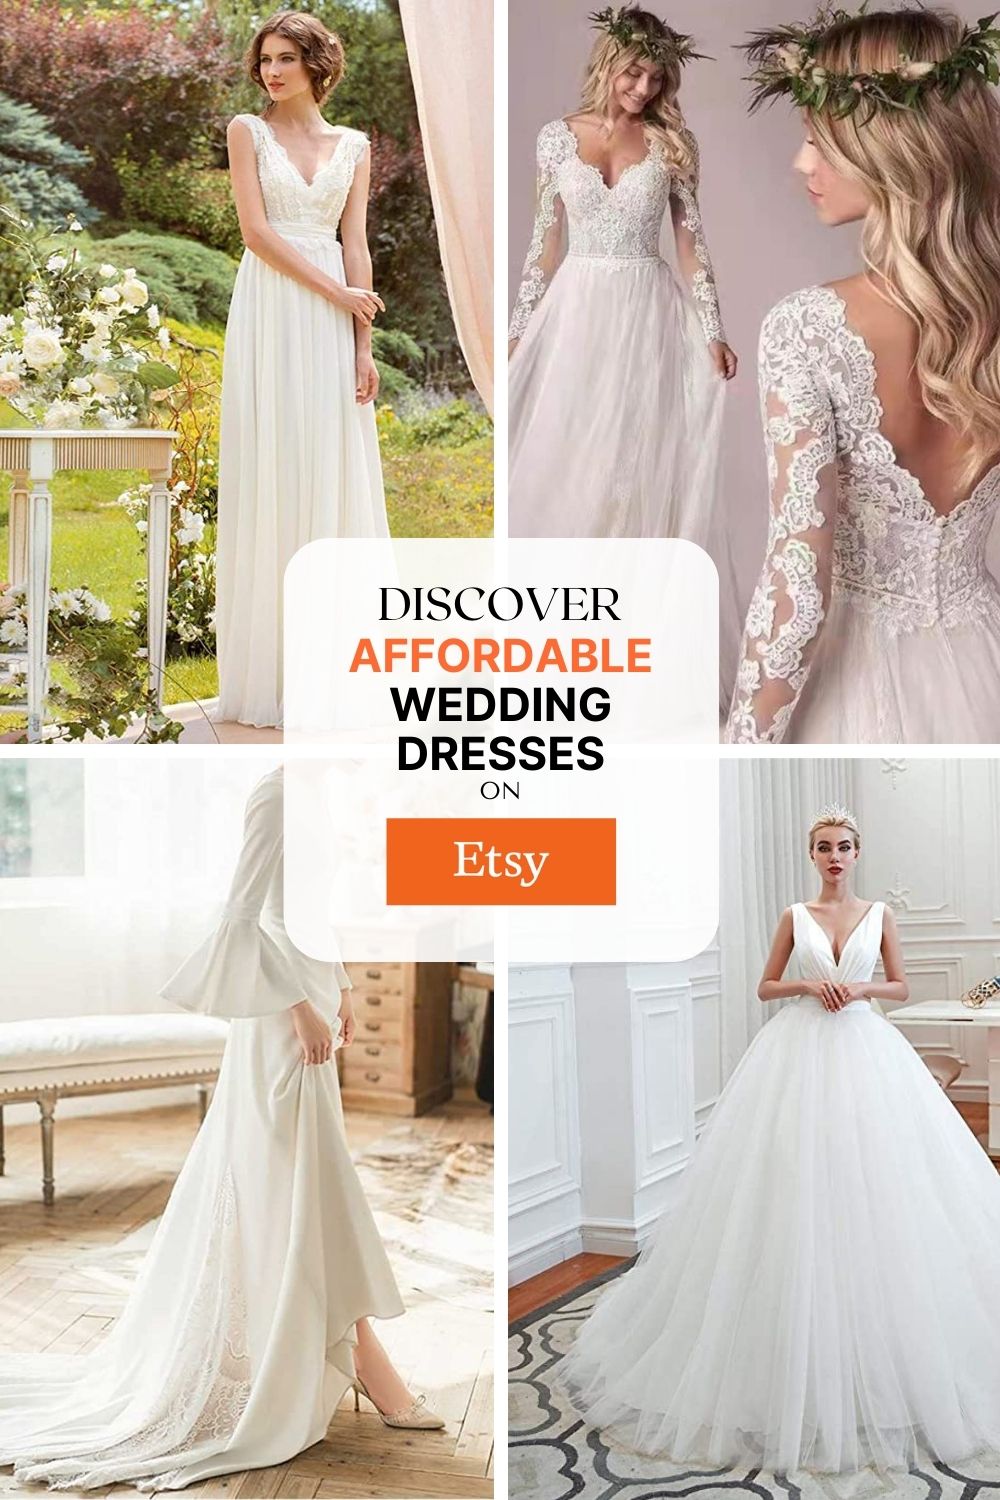 Discover Affordable Wedding Dresses on Etsy